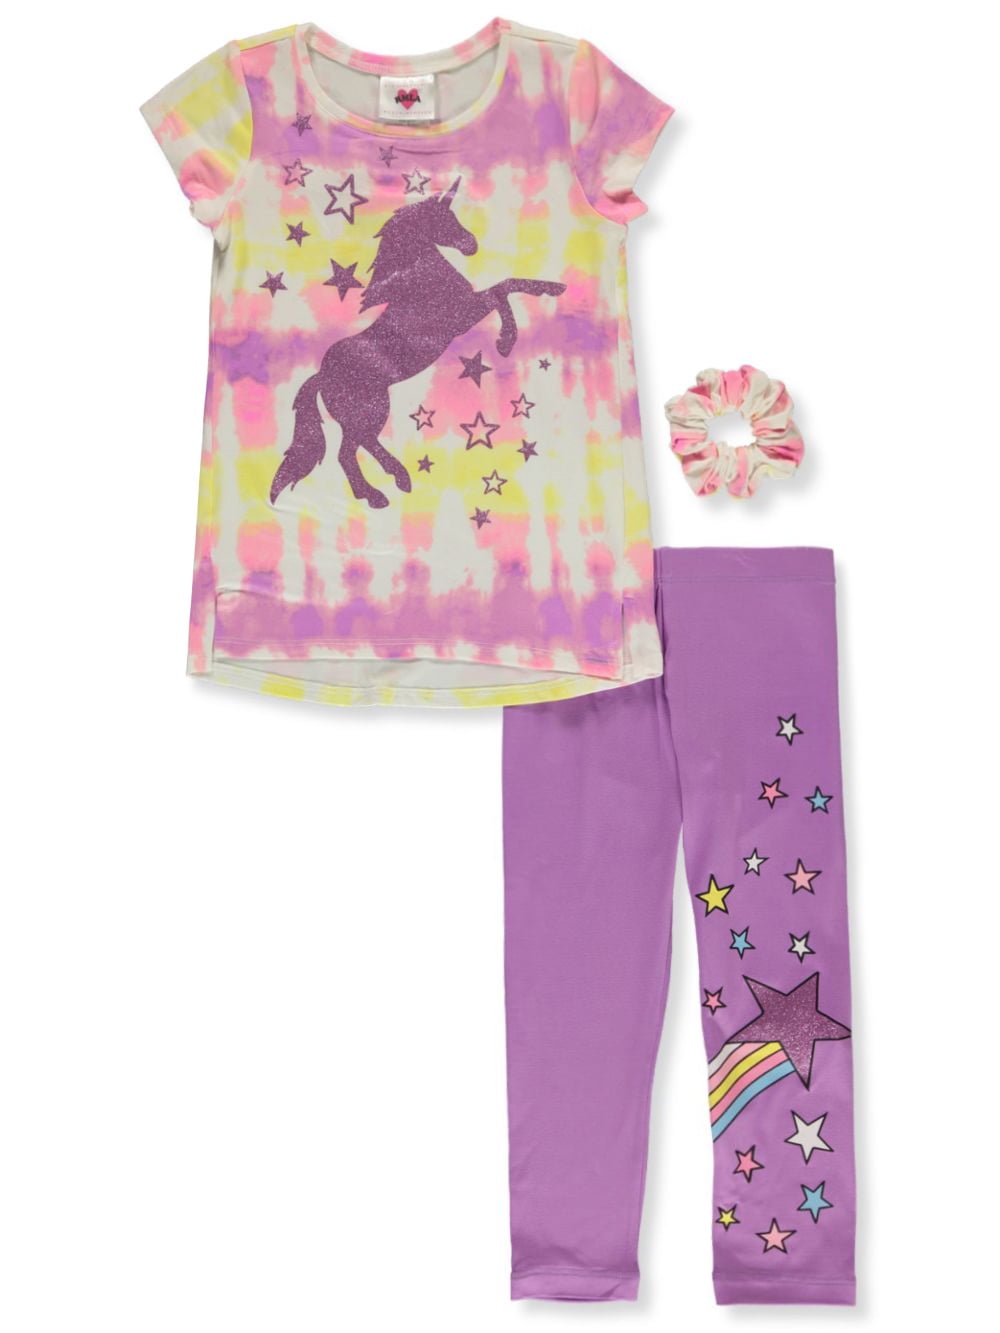 NEW Boutique Girls Pony Horse Pink Ruffle Tunic Dress & Leggings Outfit Set 